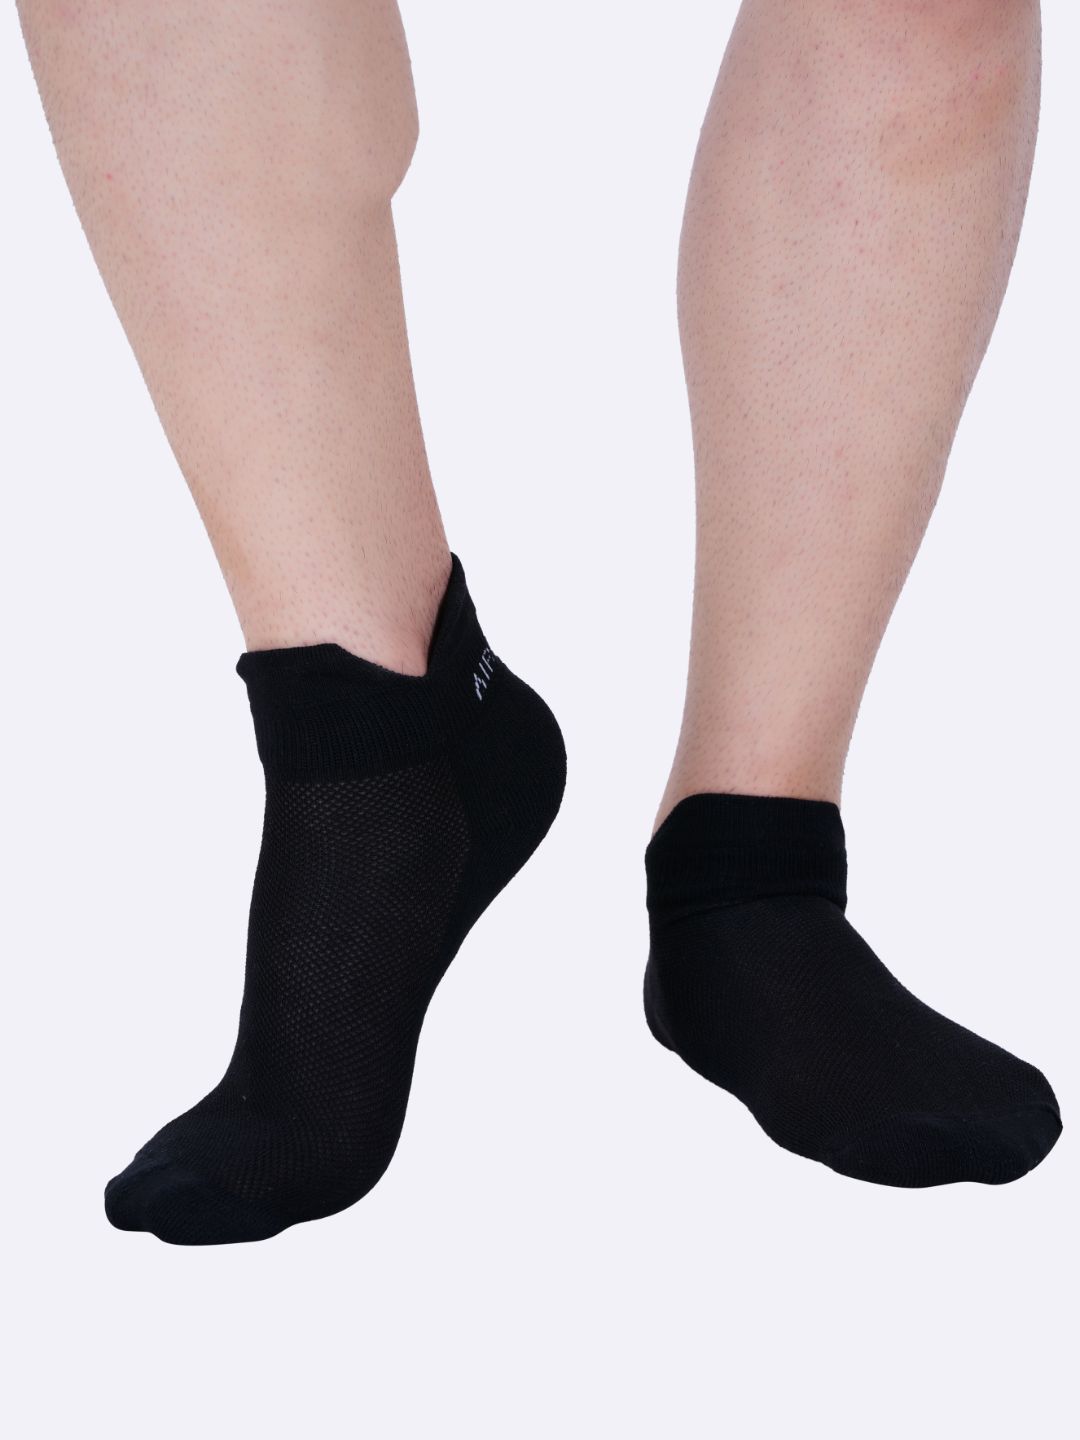 AirGarb - Comfortable Cotton Socks and T-Shirts for Women and Men - Air ...